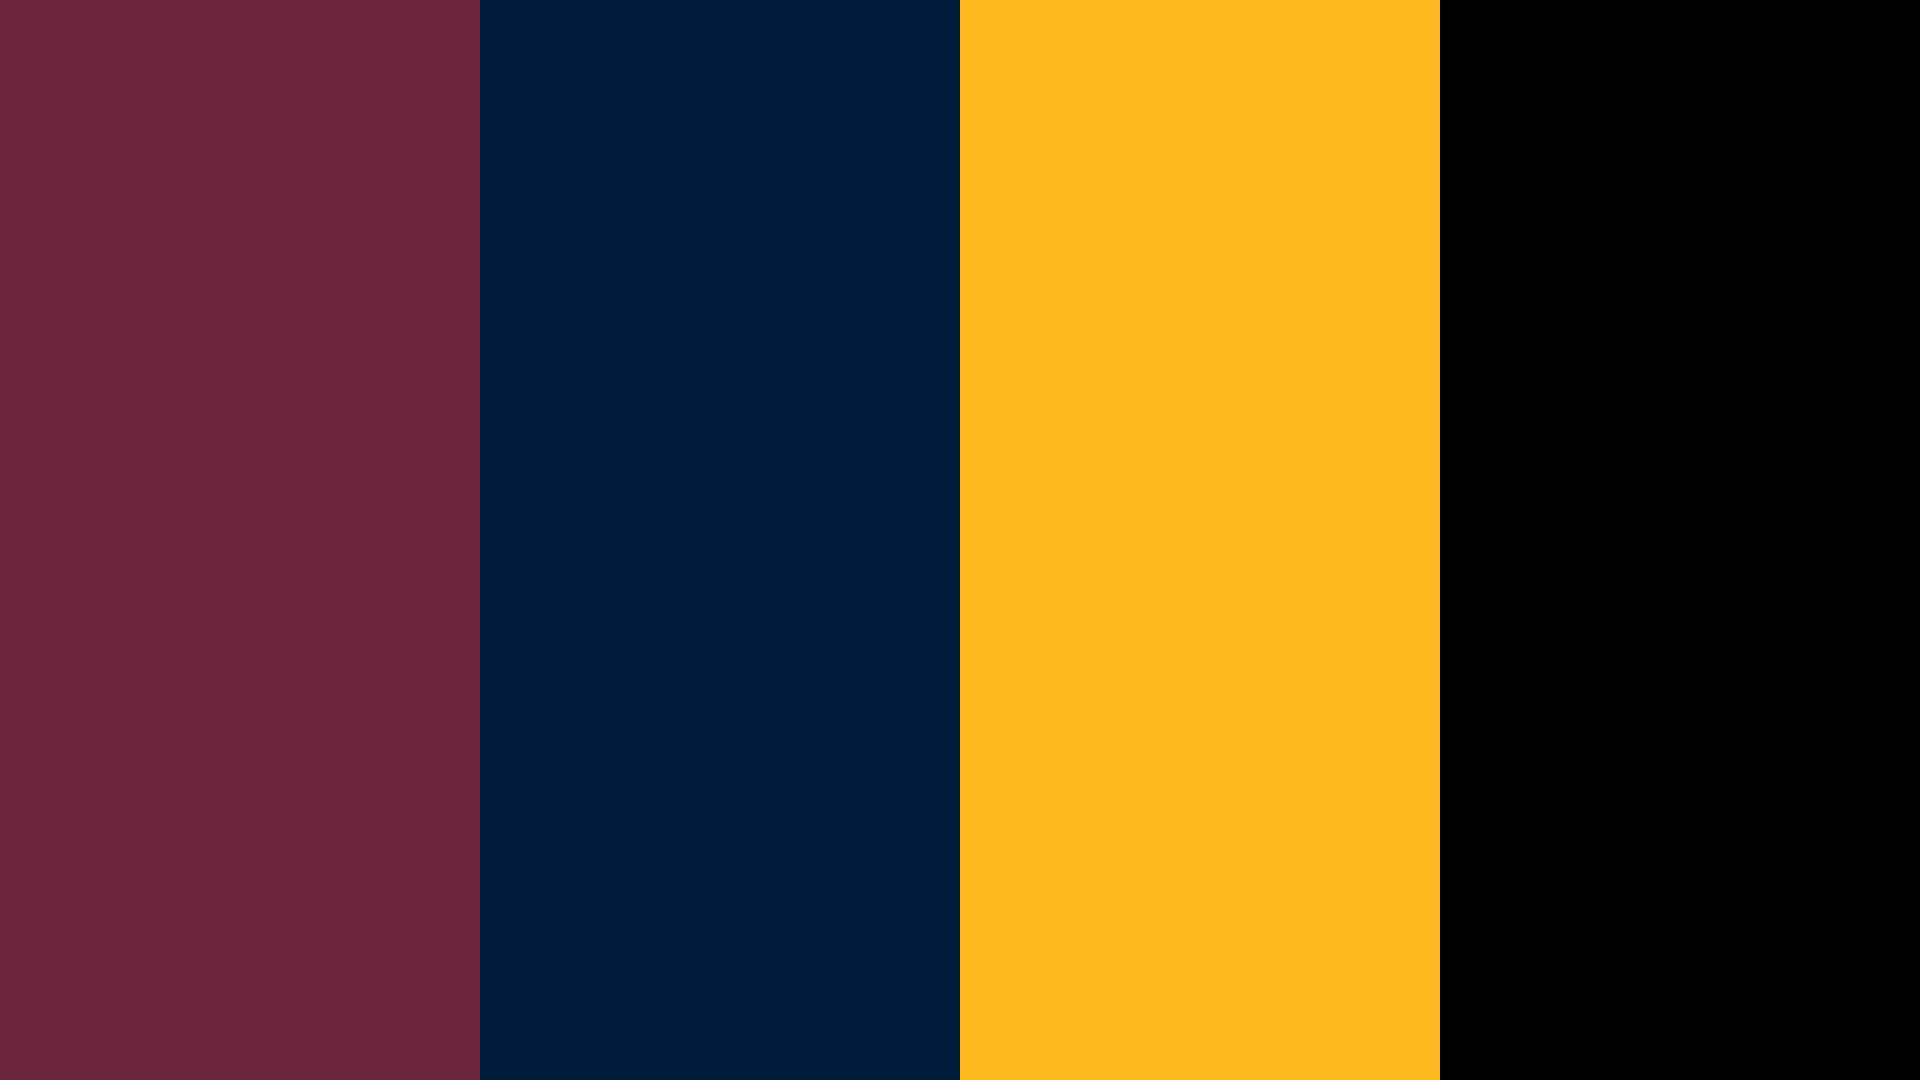 Cleveland Cavaliers flag color codes